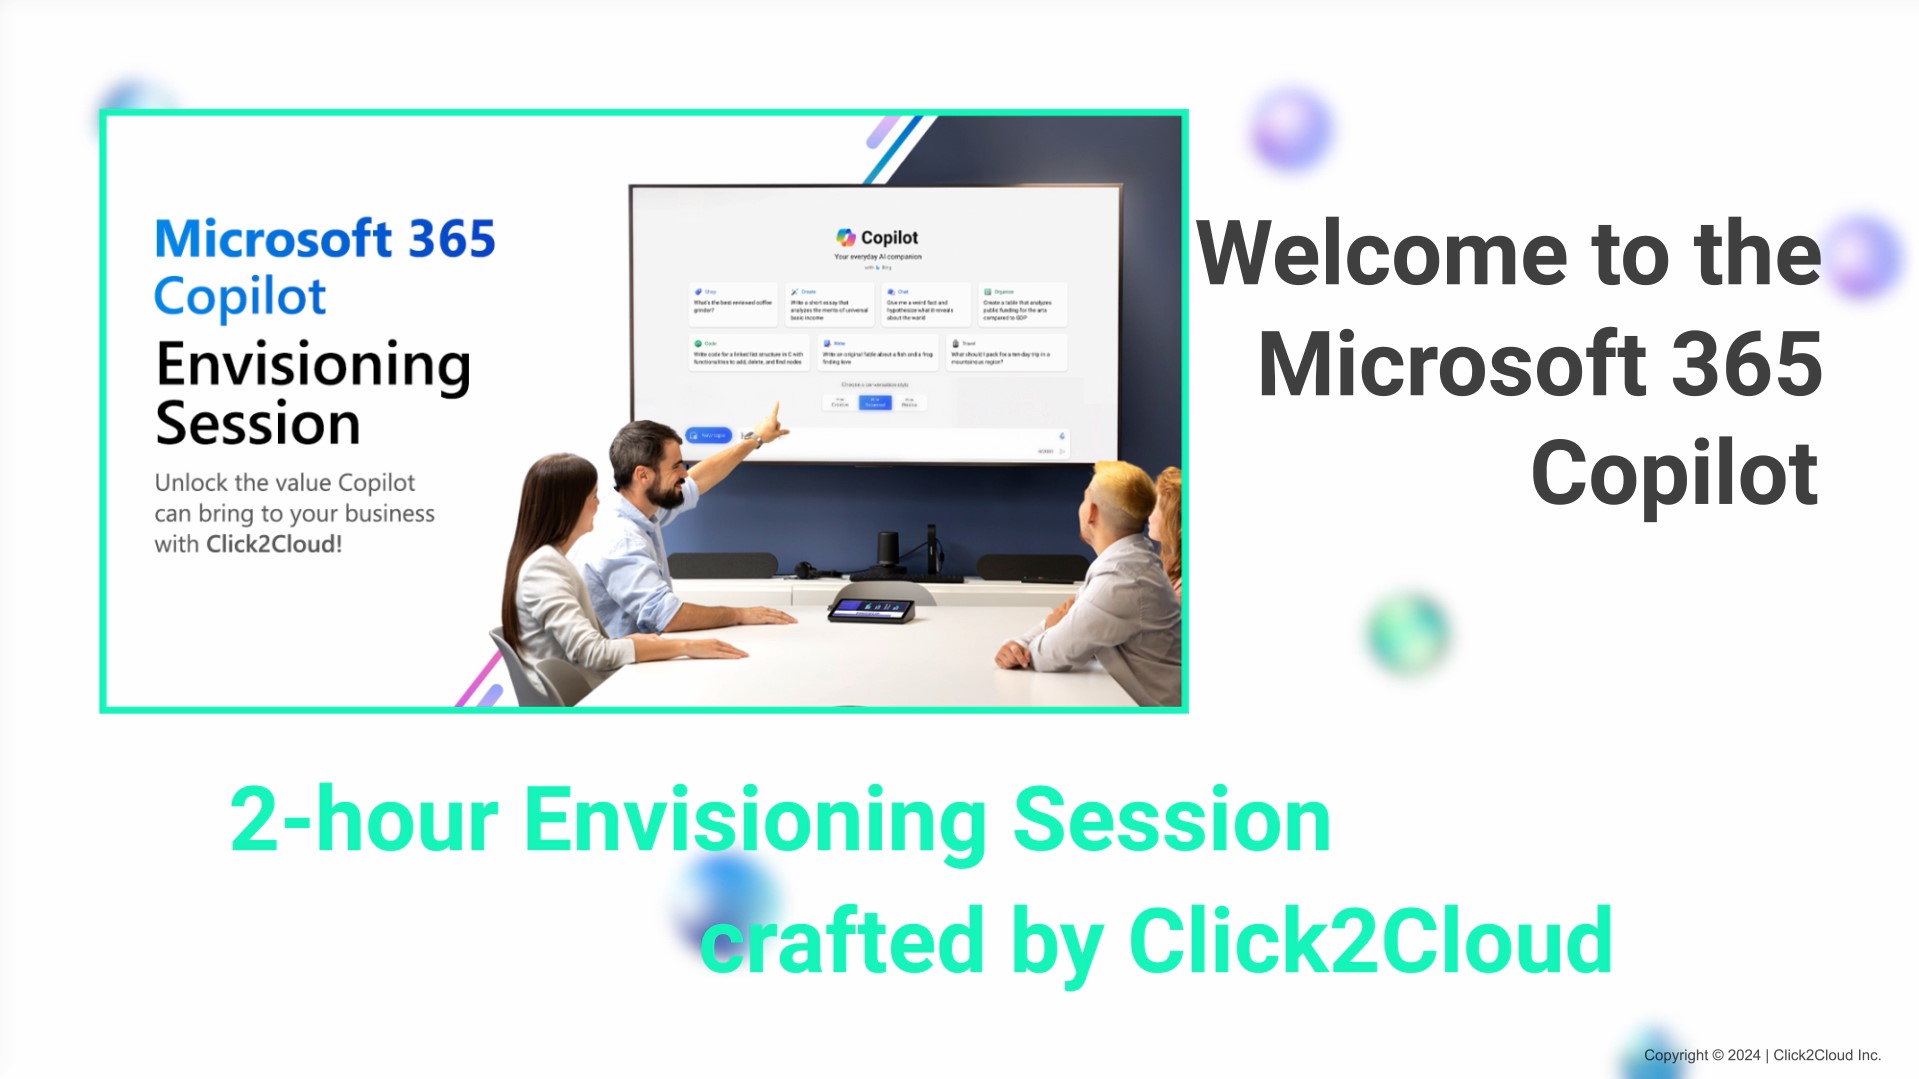 Kick-Start Your Microsoft 365 Copilot Readiness Journey with Click2Cloud’s Envisioning Session-Click2Cloud